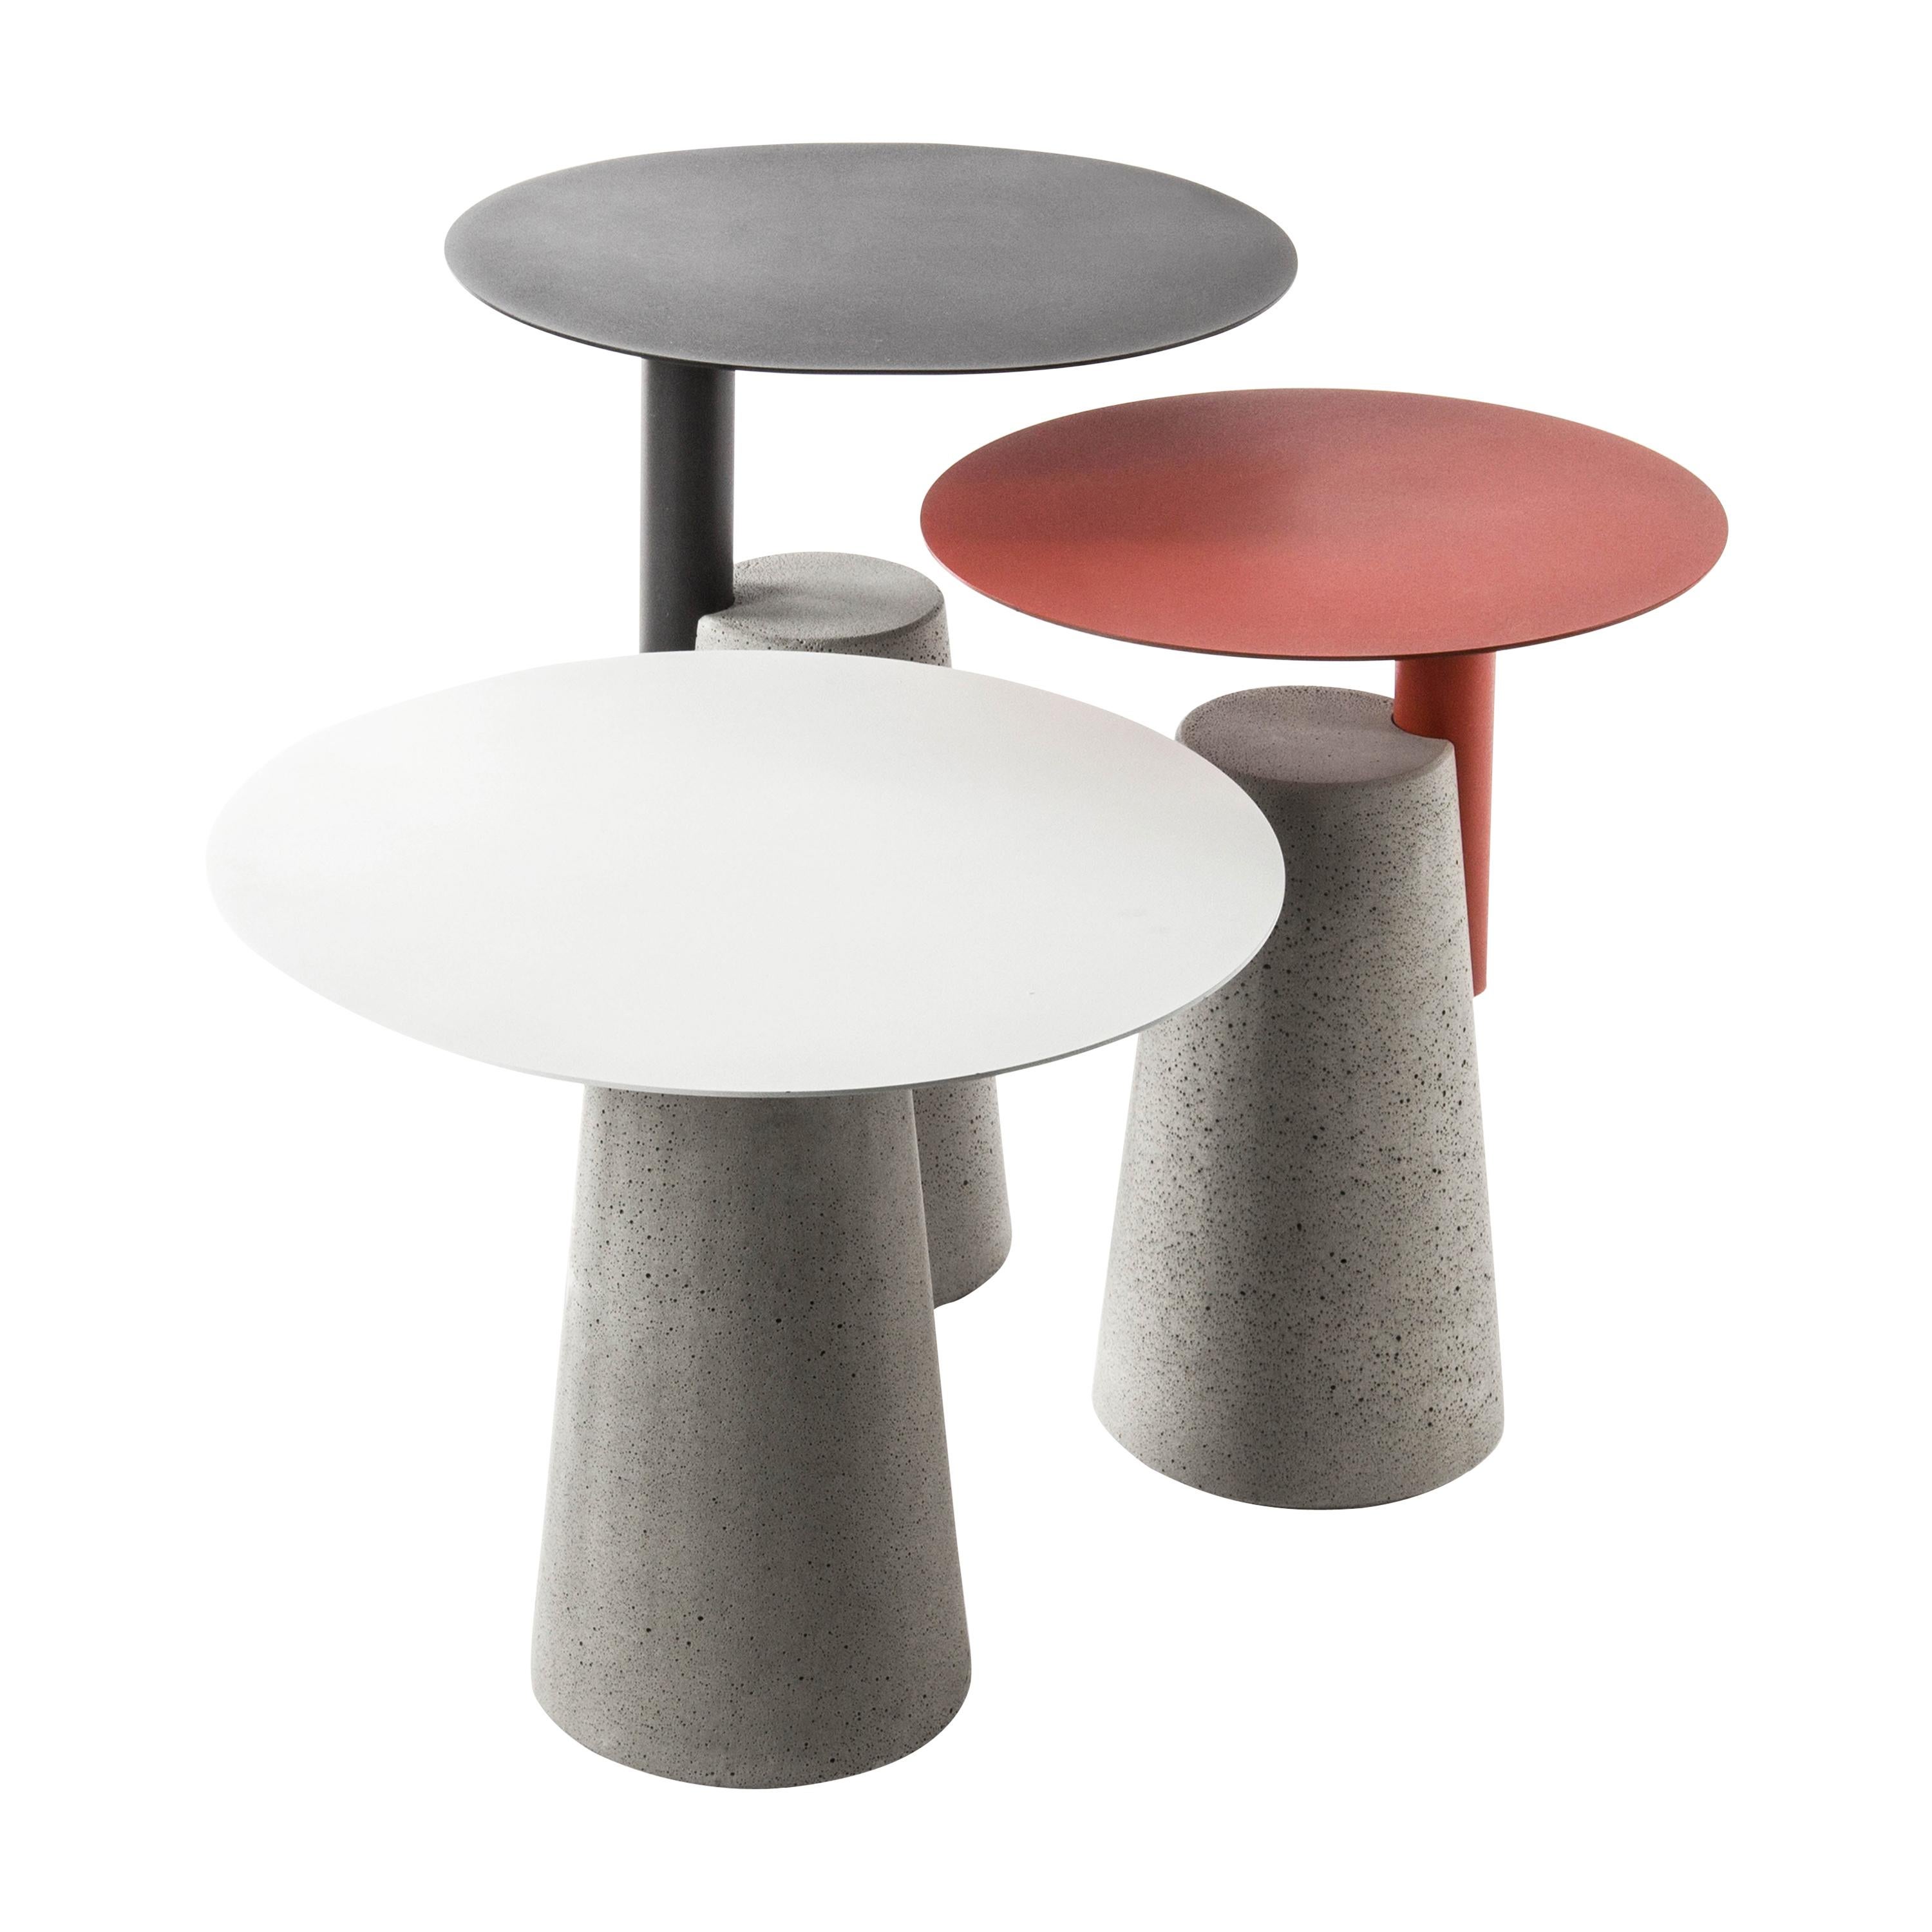 Side Table 'Bai' Made of Concrete and Steel '+Colors' '+Sizes' For Sale